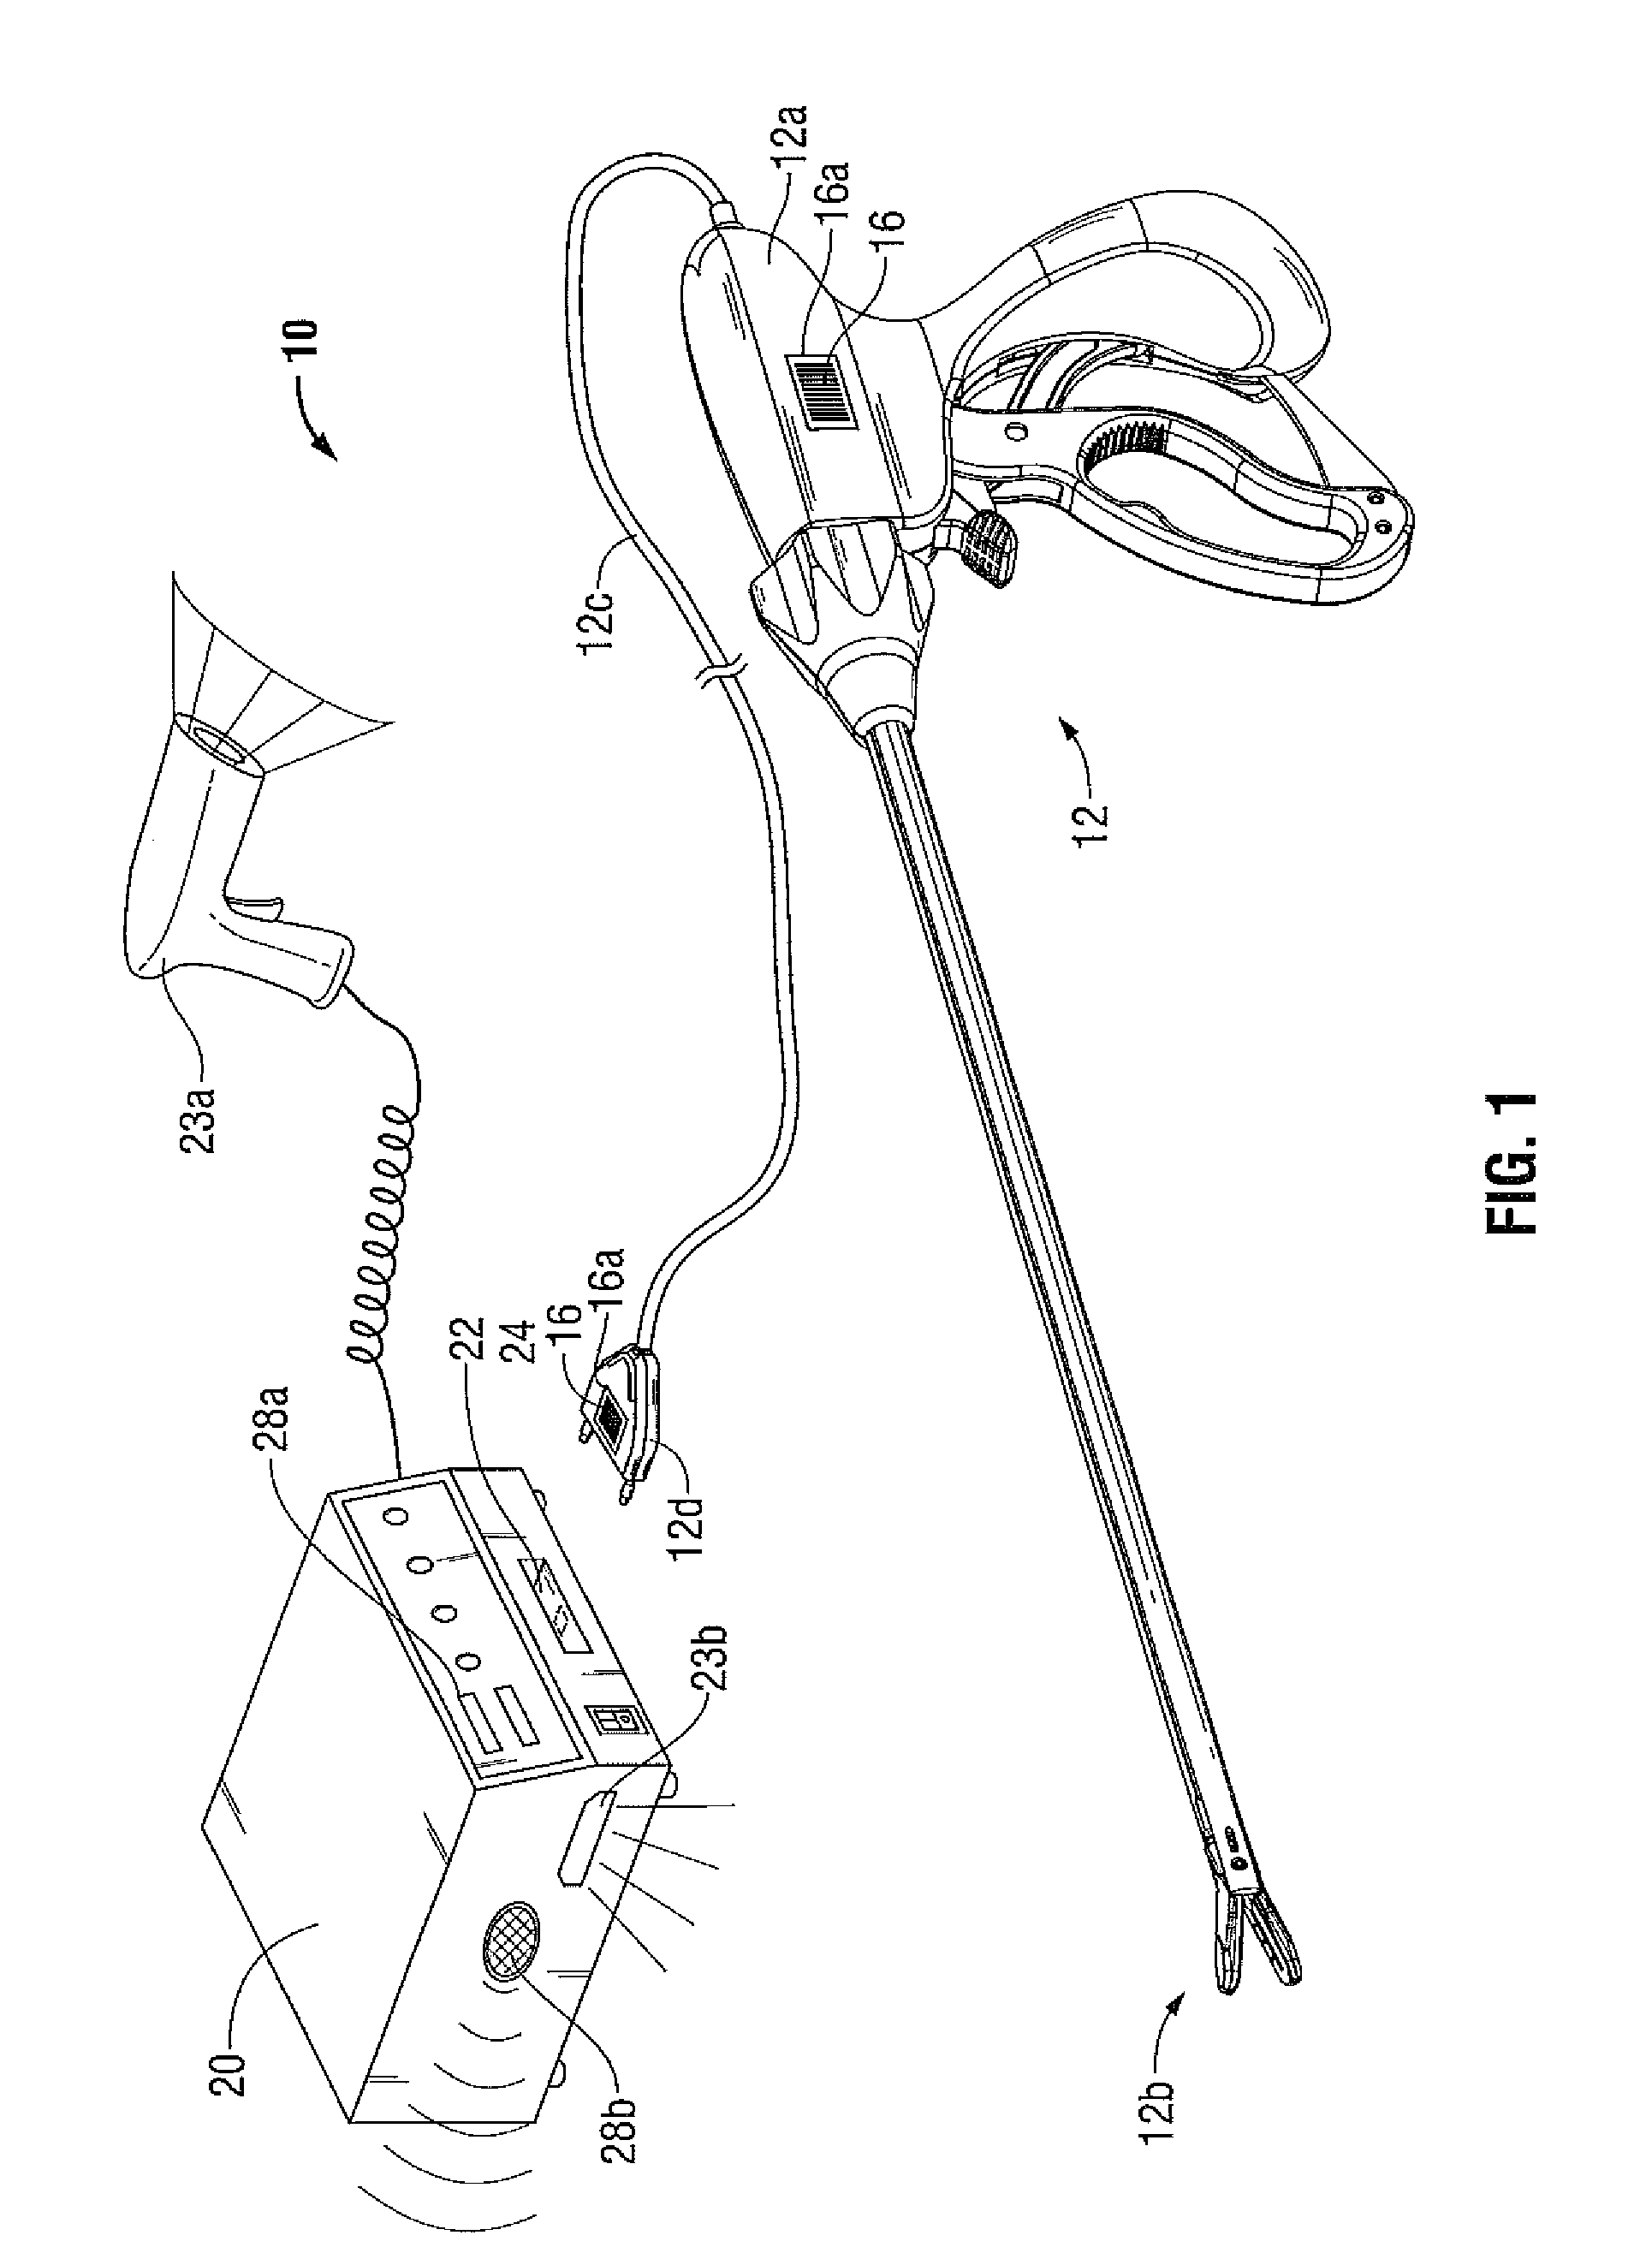 Removable Ink for Surgical Instrument